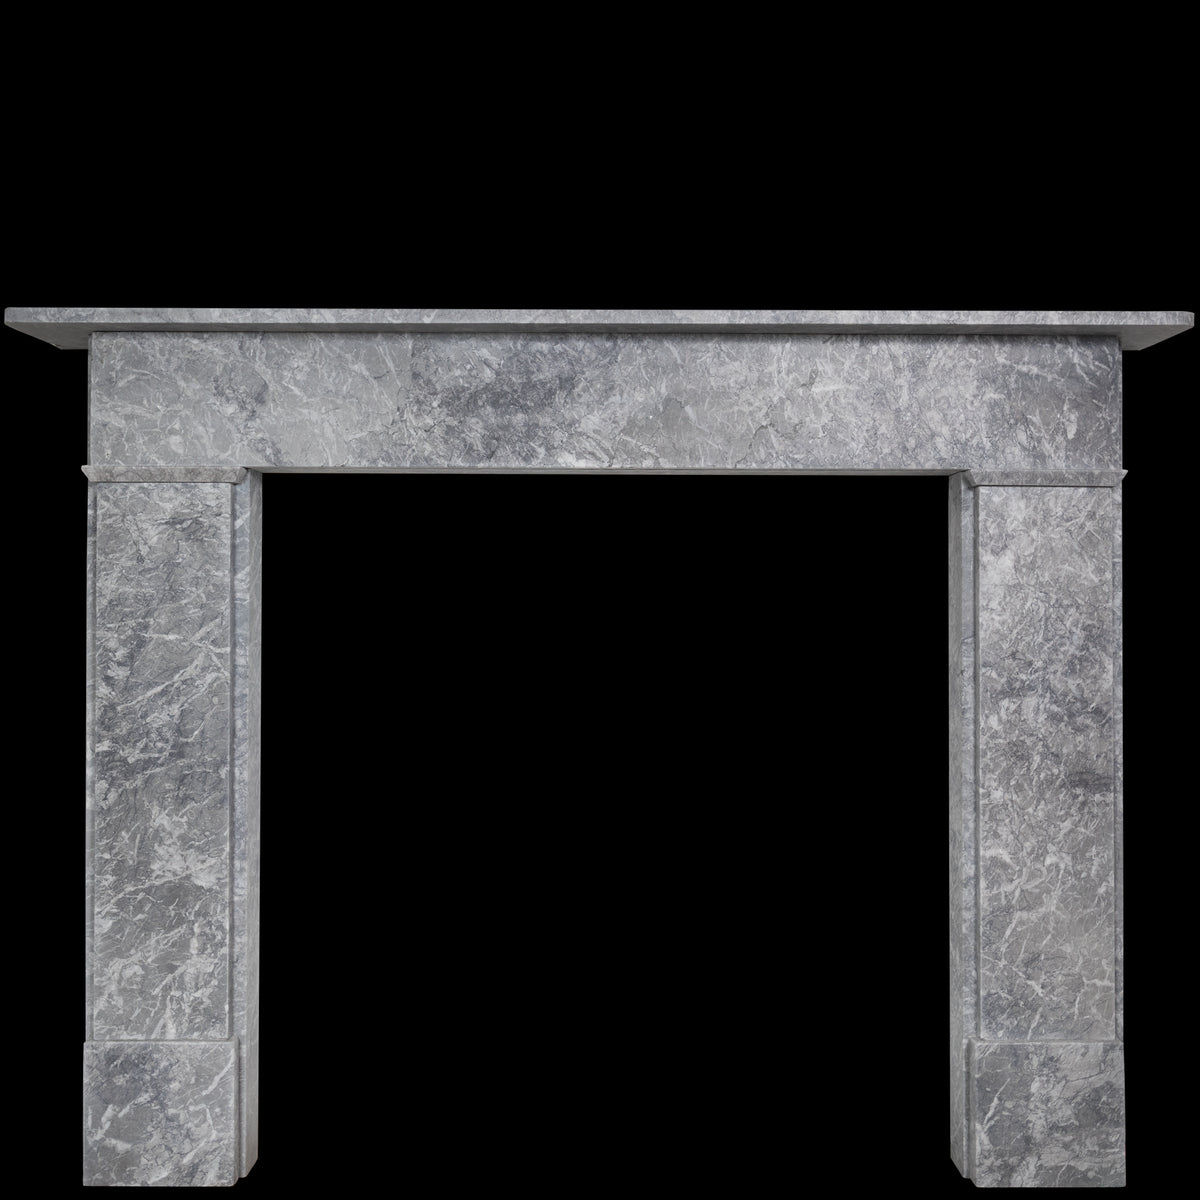 Late Georgian Style Surround with Grey Marble from Scotland Yard | The Architectural Forum